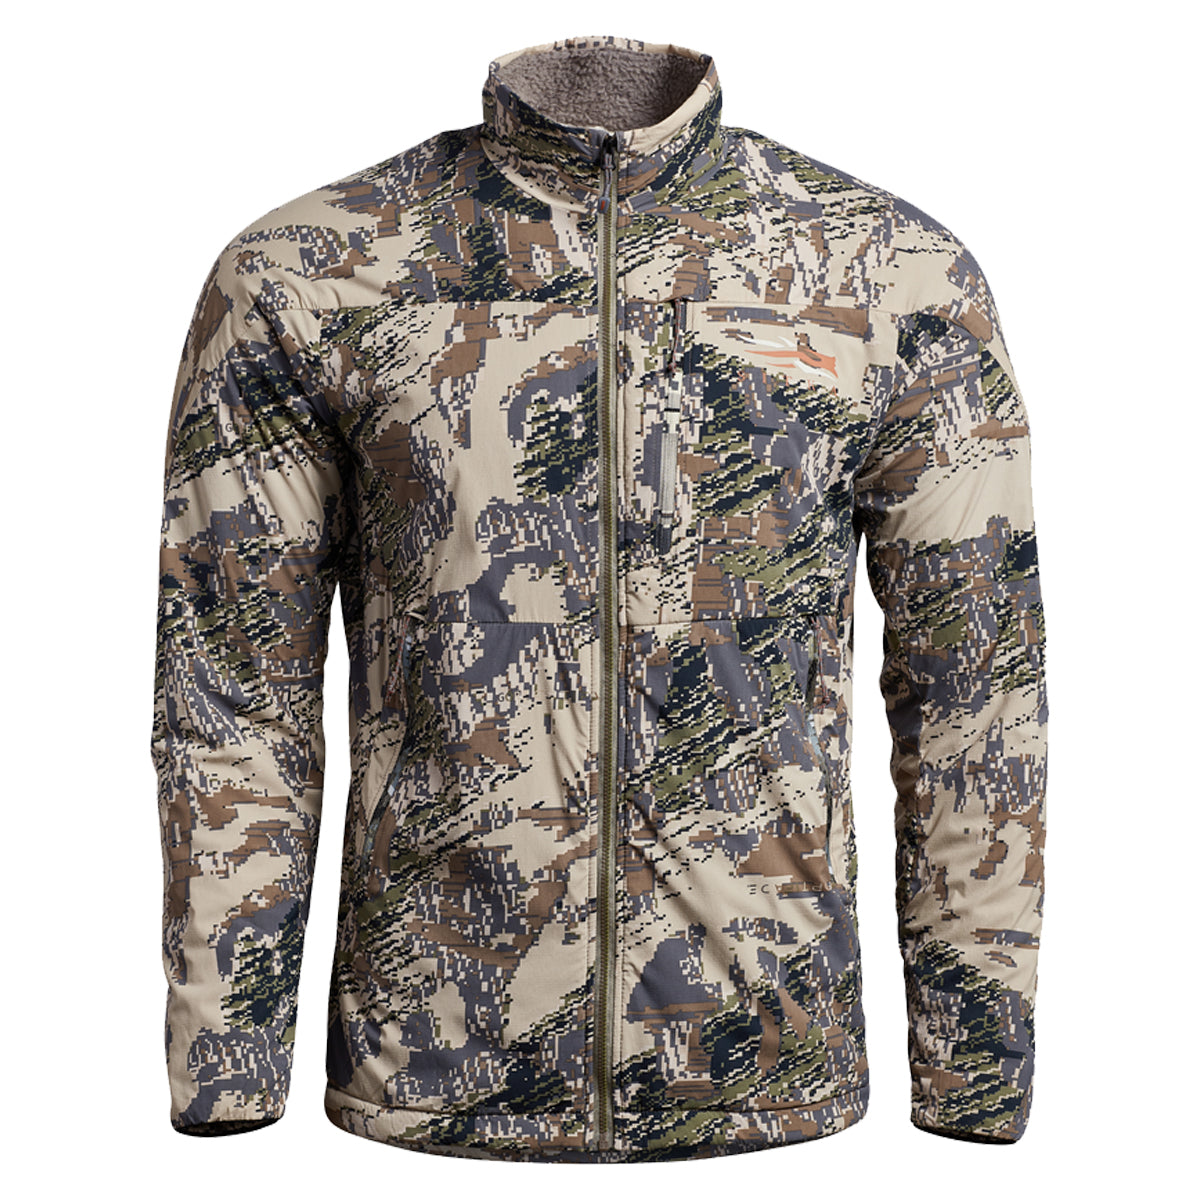 Sitka Men's Ambient Jacket in Optifade Open Country by GOHUNT | Sitka - GOHUNT Shop